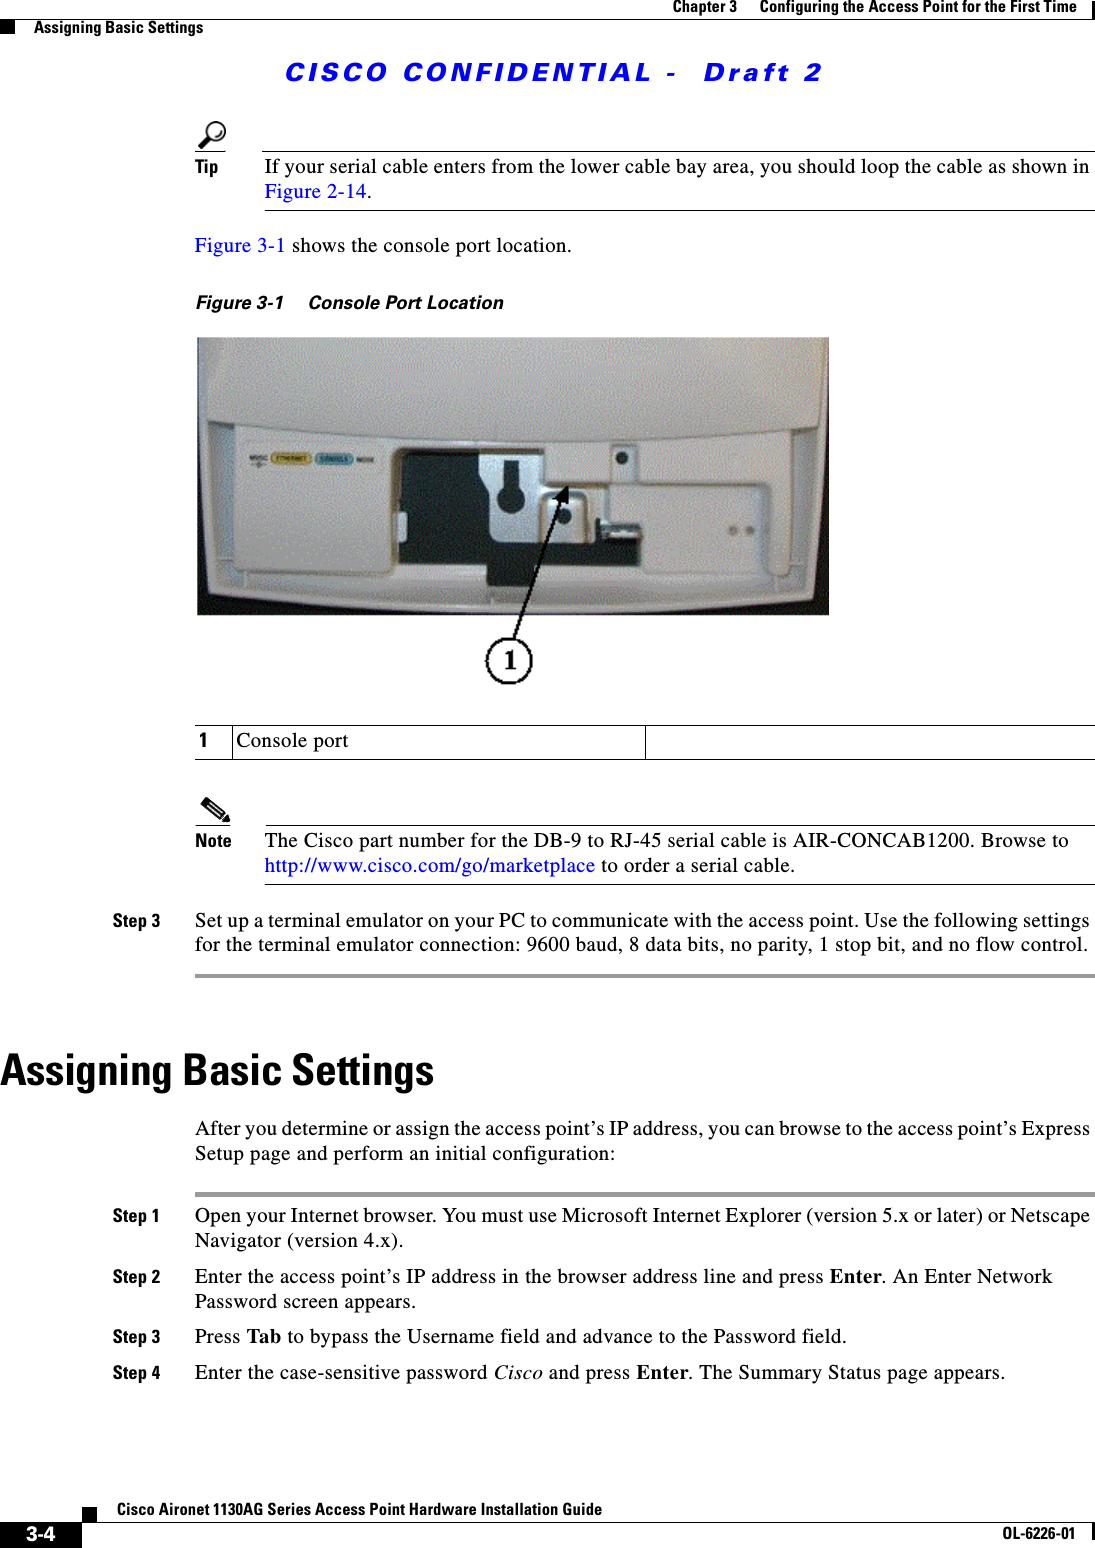  CISCO CONFIDENTIAL -  Draft 23-4Cisco Aironet 1130AG Series Access Point Hardware Installation GuideOL-6226-01Chapter 3      Configuring the Access Point for the First TimeAssigning Basic SettingsTip If your serial cable enters from the lower cable bay area, you should loop the cable as shown in Figure 2-14.Figure 3-1 shows the console port location.Figure 3-1 Console Port LocationNote The Cisco part number for the DB-9 to RJ-45 serial cable is AIR-CONCAB1200. Browse to http://www.cisco.com/go/marketplace to order a serial cable.Step 3 Set up a terminal emulator on your PC to communicate with the access point. Use the following settings for the terminal emulator connection: 9600 baud, 8 data bits, no parity, 1 stop bit, and no flow control.Assigning Basic SettingsAfter you determine or assign the access point’s IP address, you can browse to the access point’s Express Setup page and perform an initial configuration:Step 1 Open your Internet browser. You must use Microsoft Internet Explorer (version 5.x or later) or Netscape Navigator (version 4.x).Step 2 Enter the access point’s IP address in the browser address line and press Enter. An Enter Network Password screen appears.Step 3 Press Tab to bypass the Username field and advance to the Password field.Step 4 Enter the case-sensitive password Cisco and press Enter. The Summary Status page appears. 1Console port